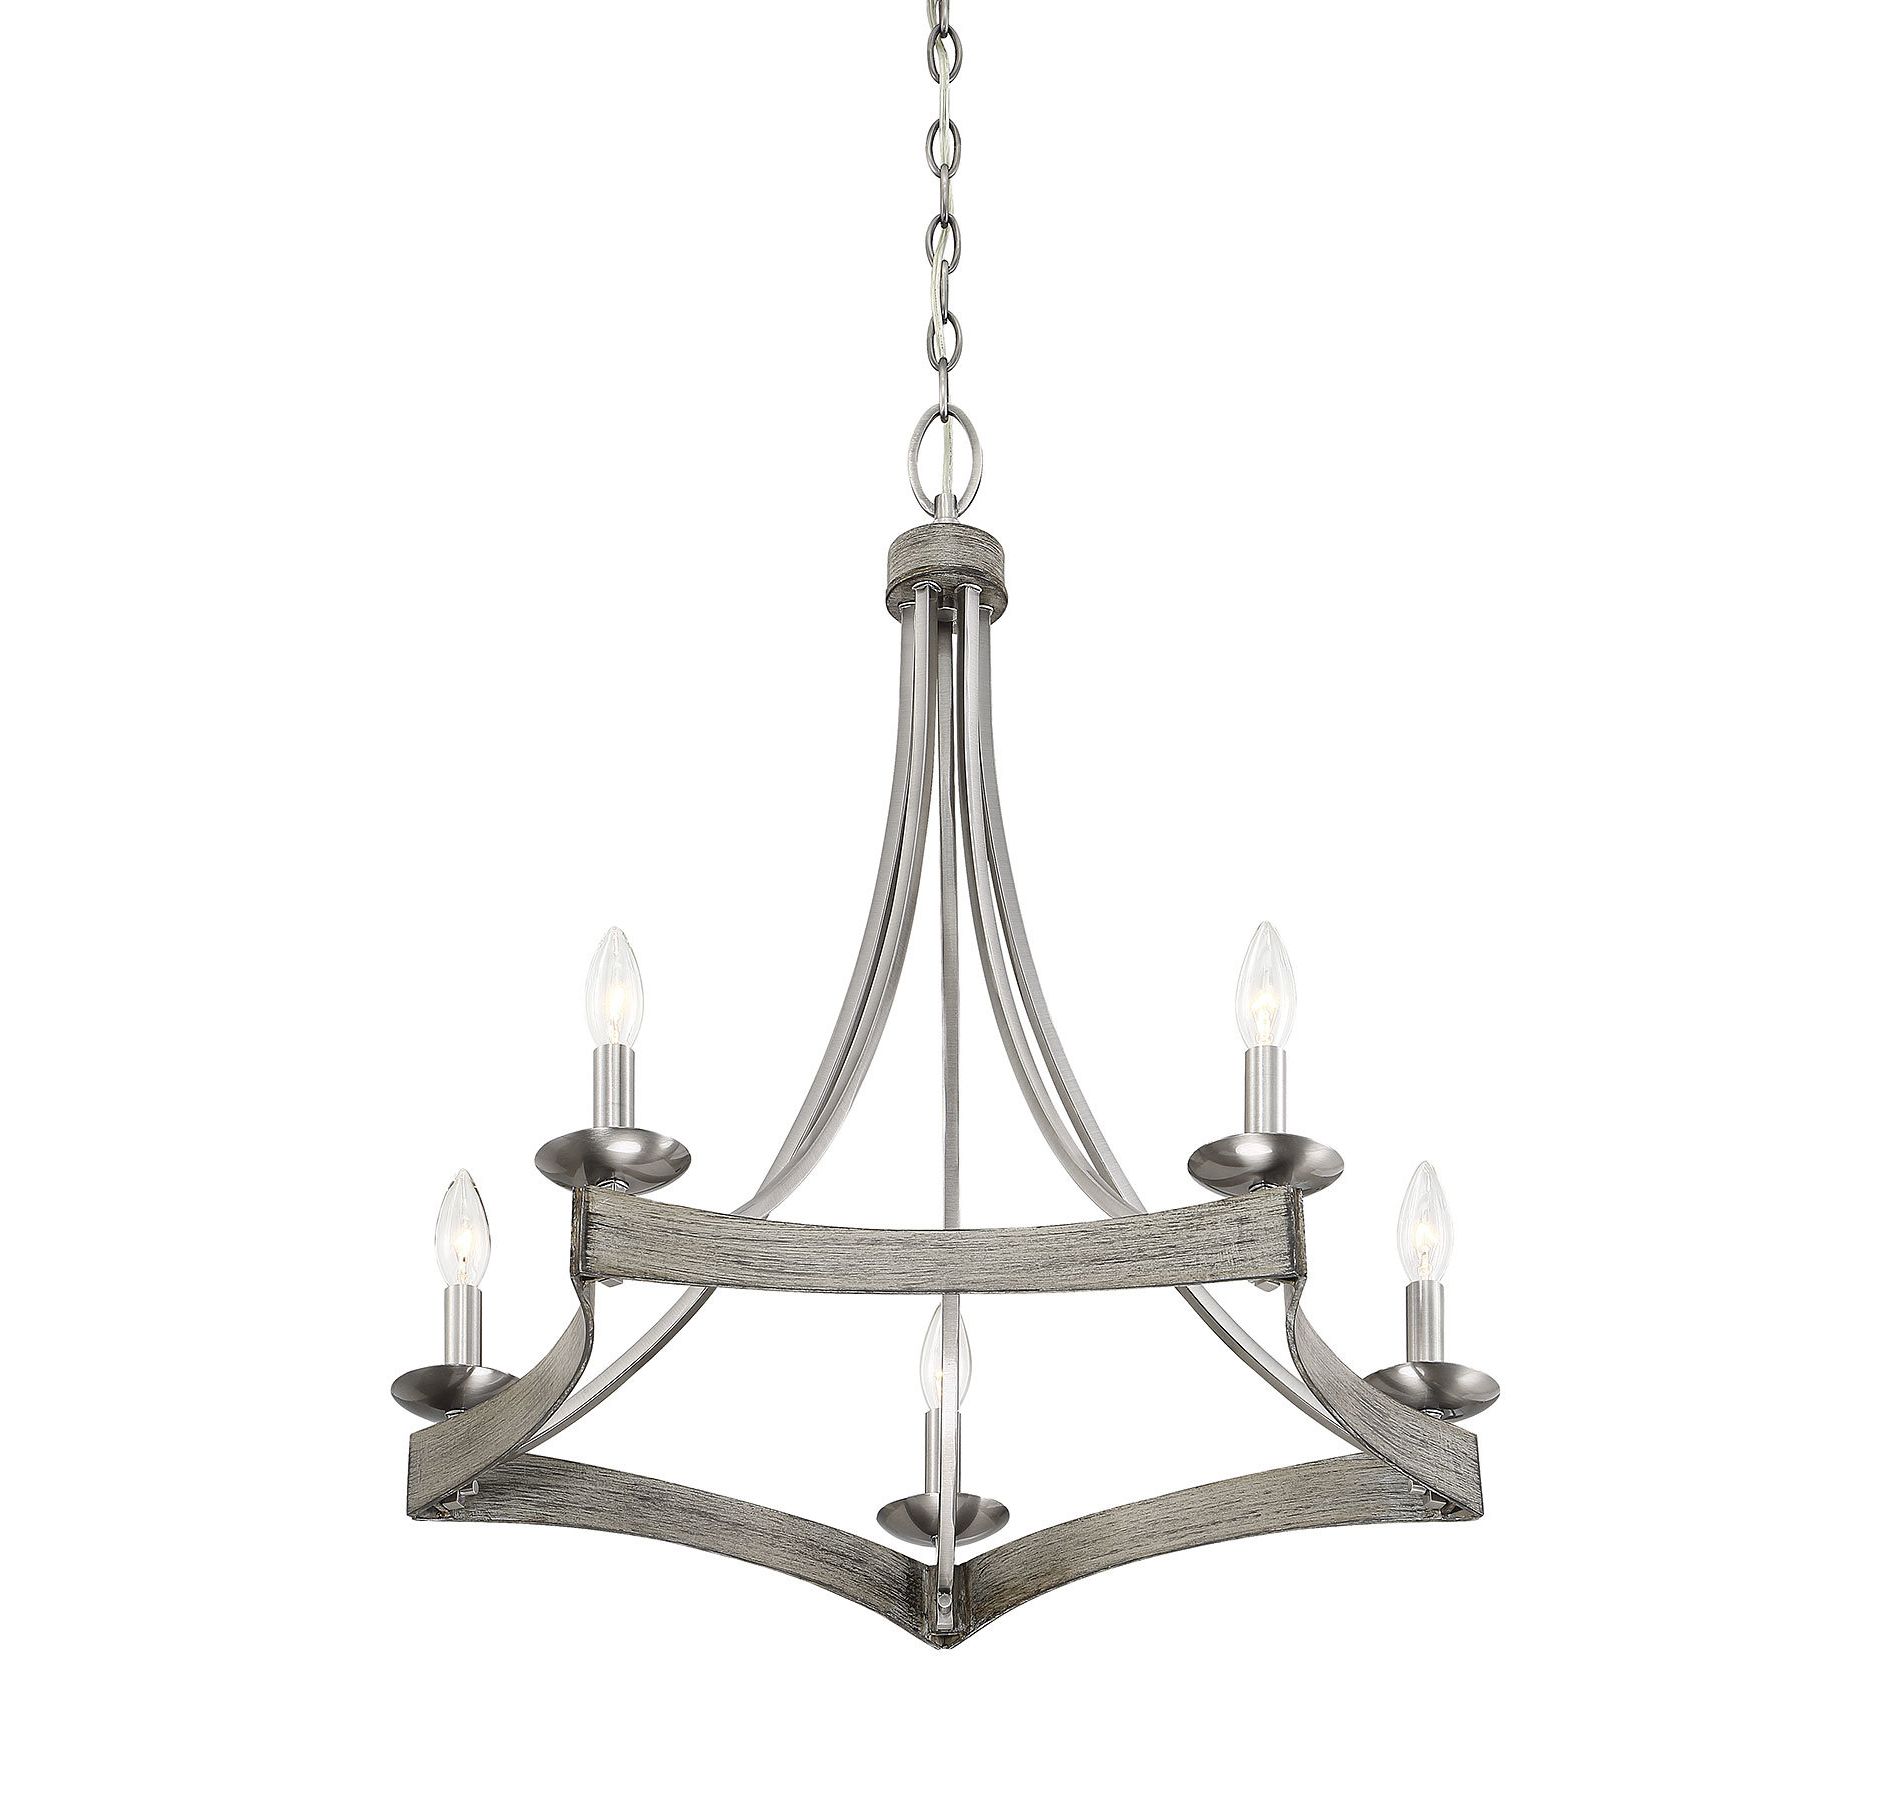 Favorite Unger 5 Light Candle Style Chandelier With Berger 5 Light Candle Style Chandeliers (View 3 of 25)